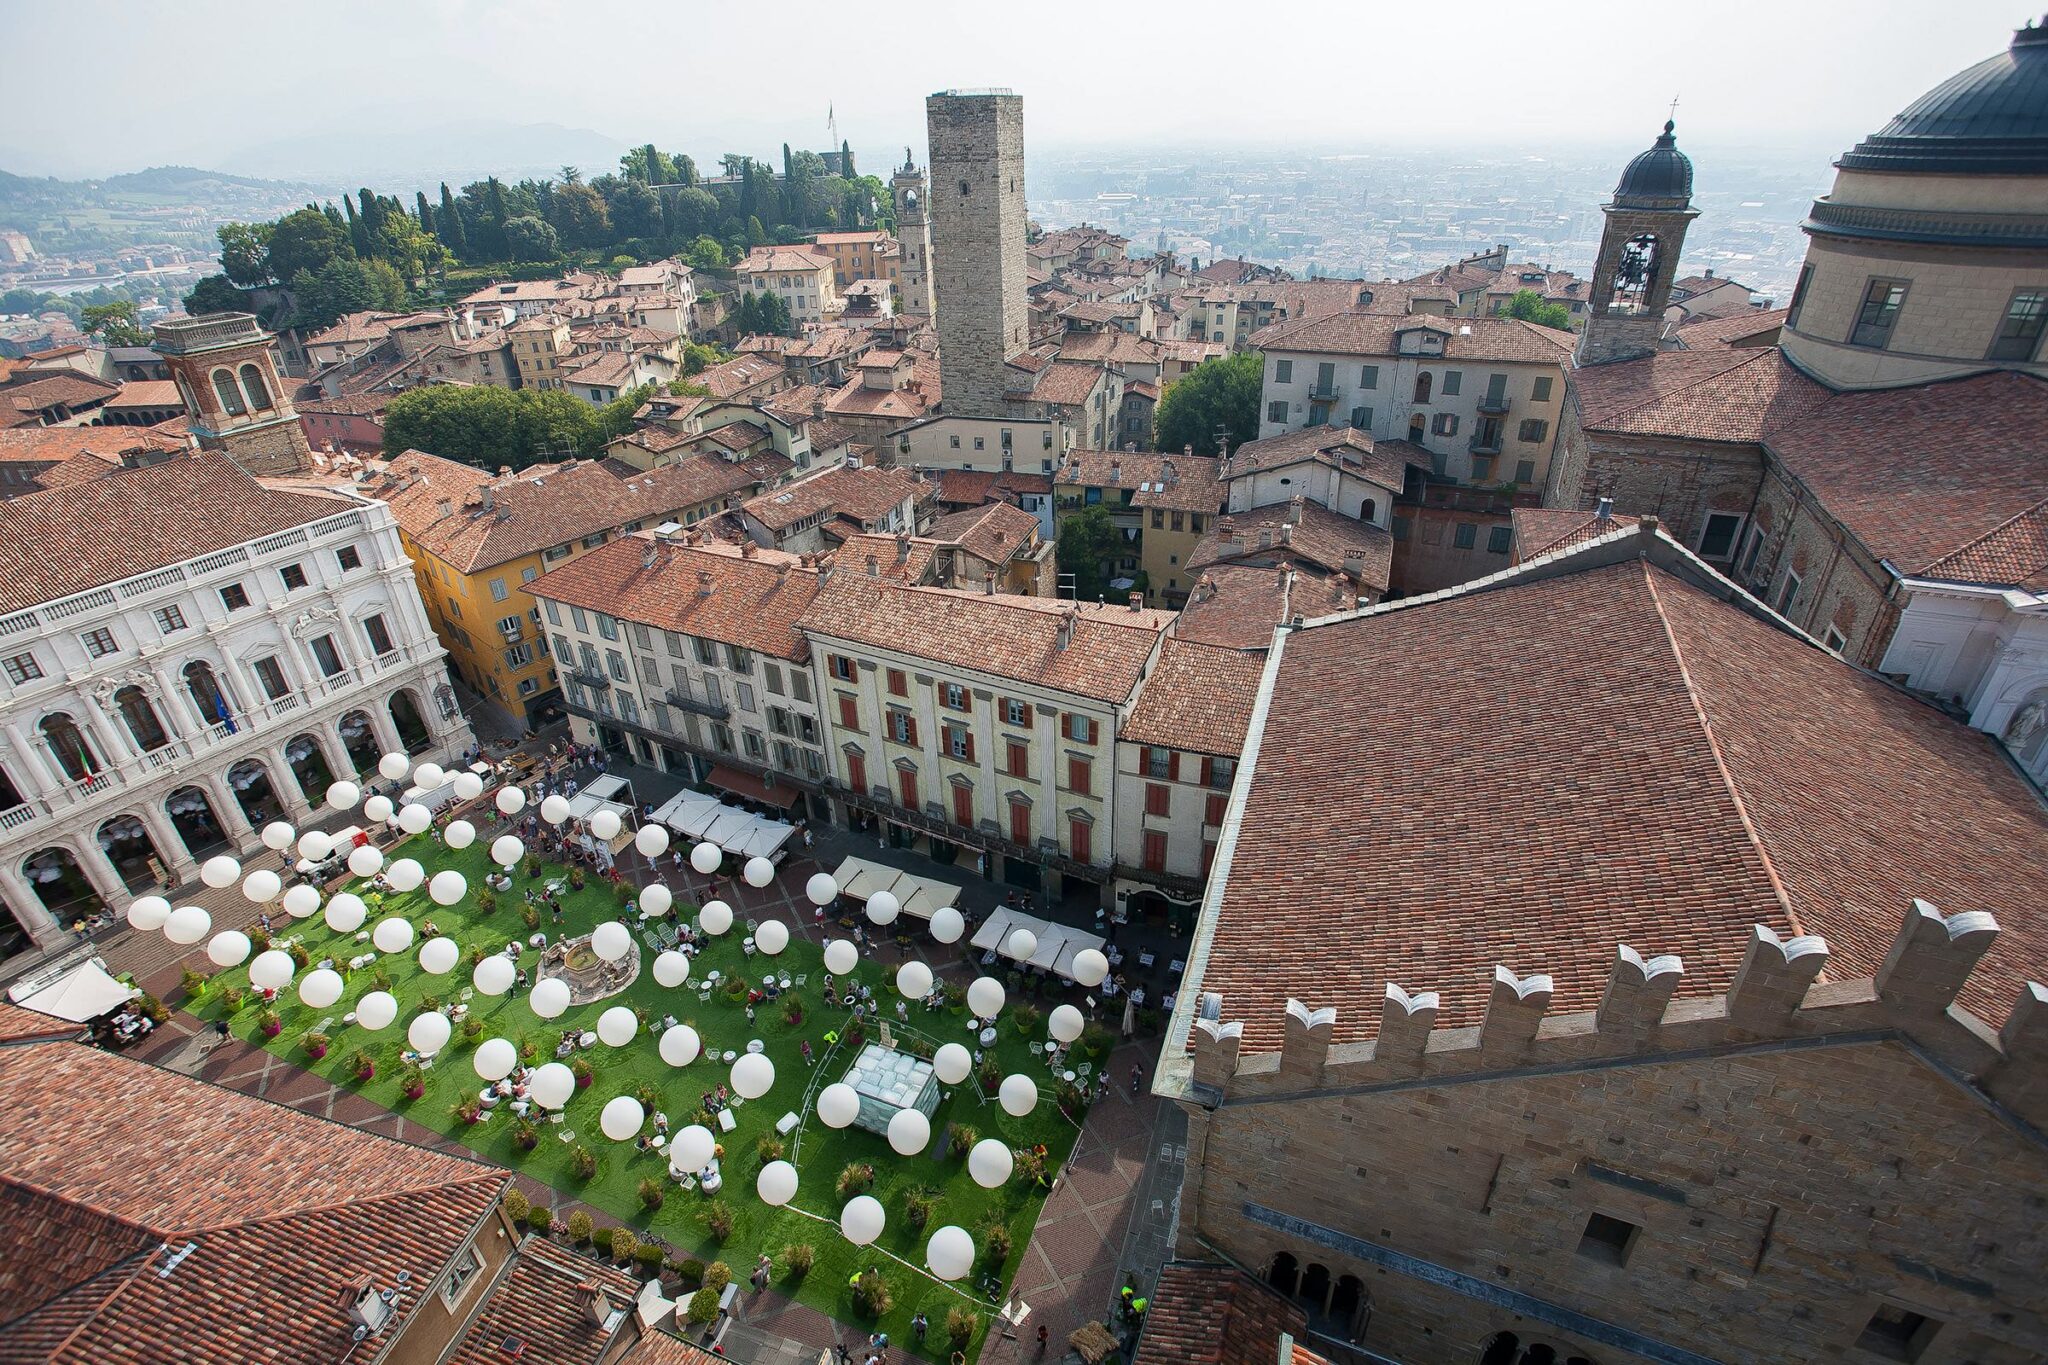 The Piazza is crowned with a roof of white dancing balloons